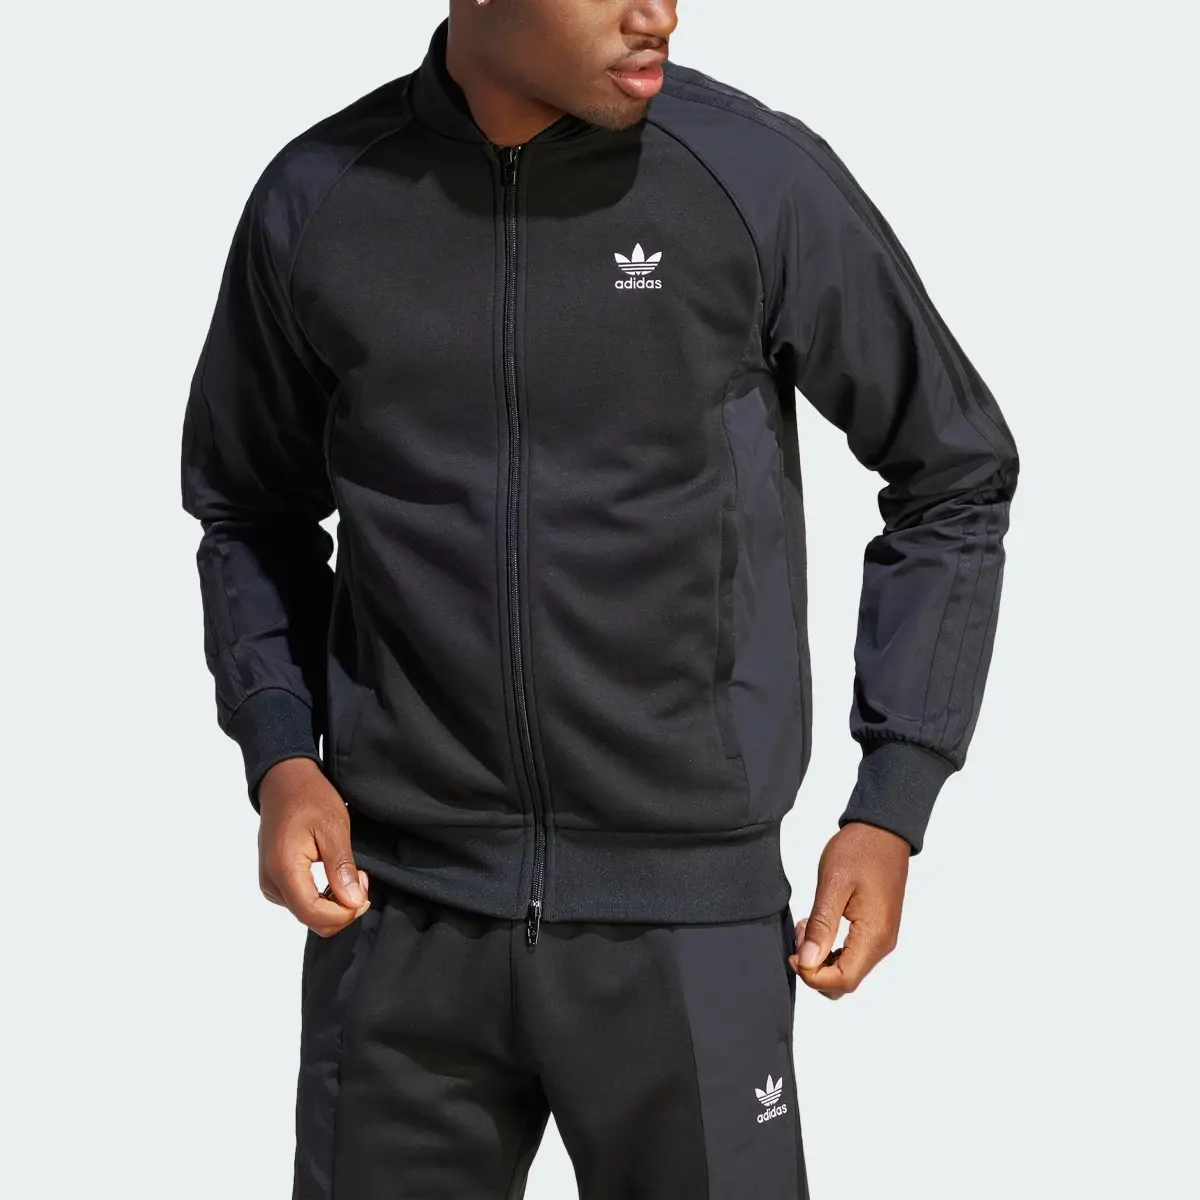 Adidas Adicolor Re-Pro SST Material Mix Track Top. 1